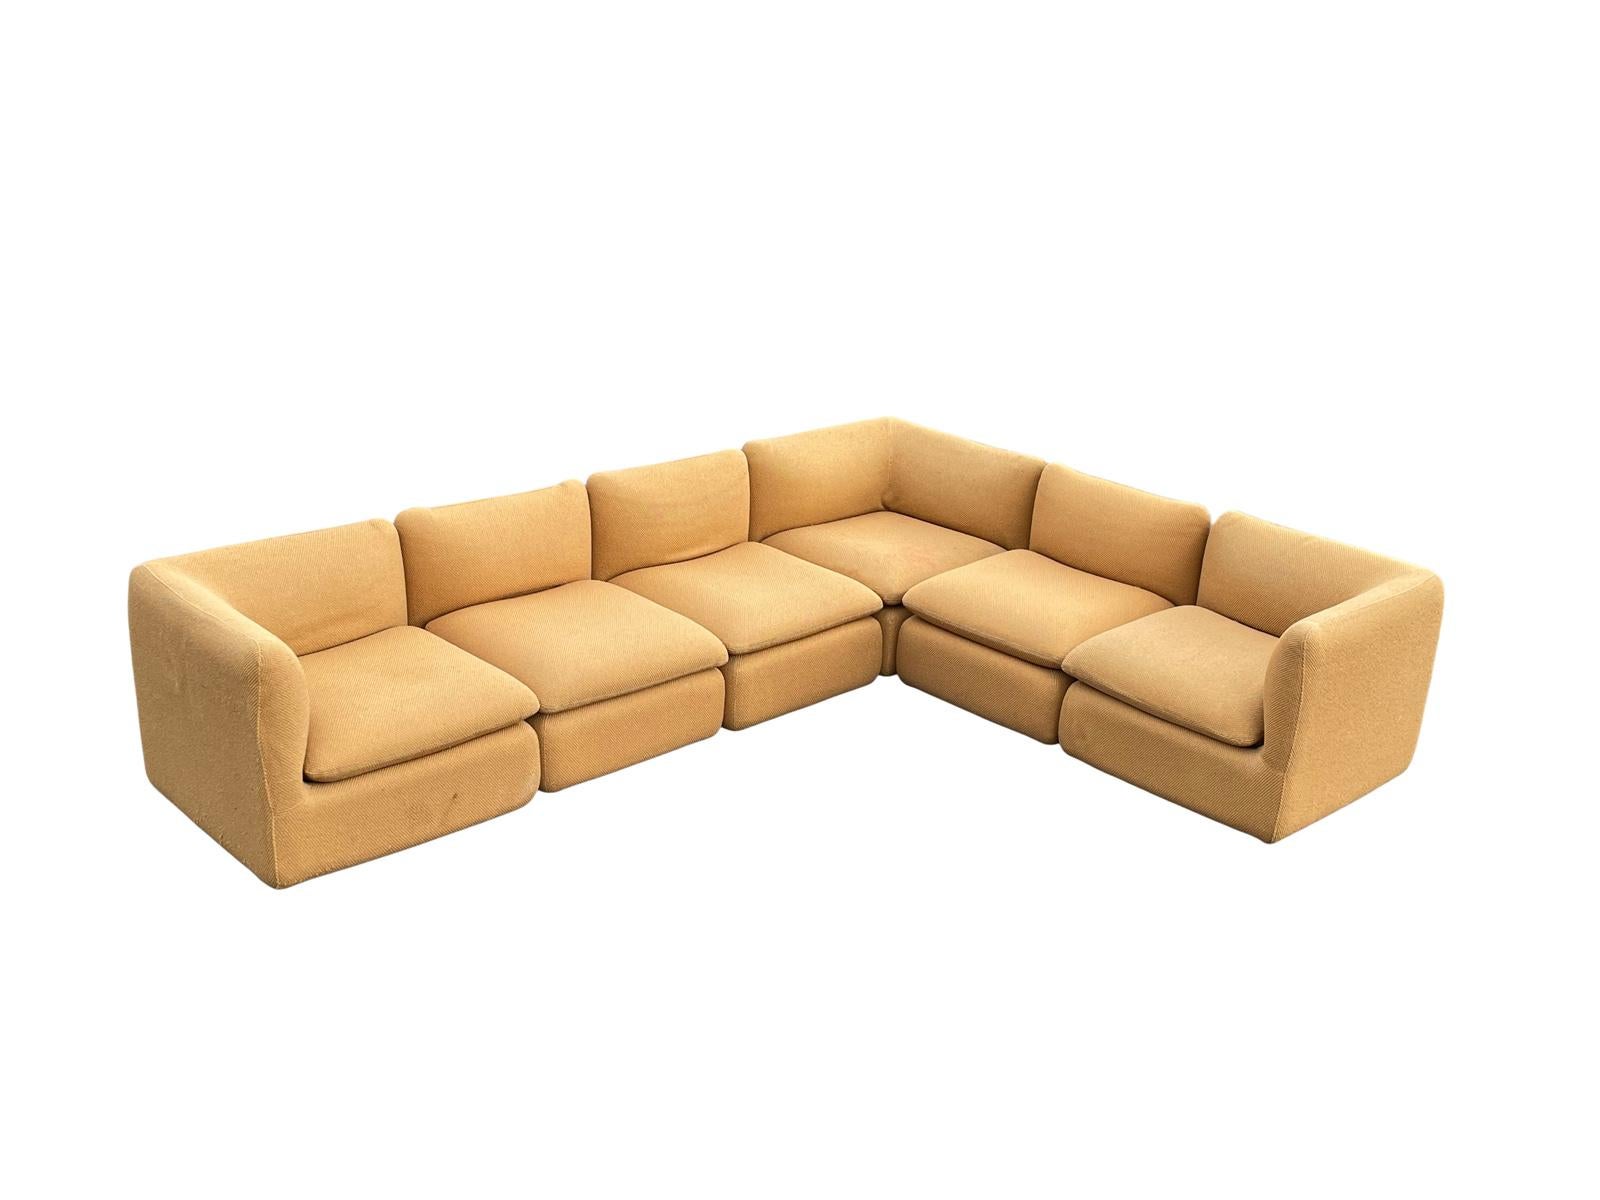 American 1980s Modular Ganging ELYSÉE Sofa Unit Sectional by Steelcase  For Sale